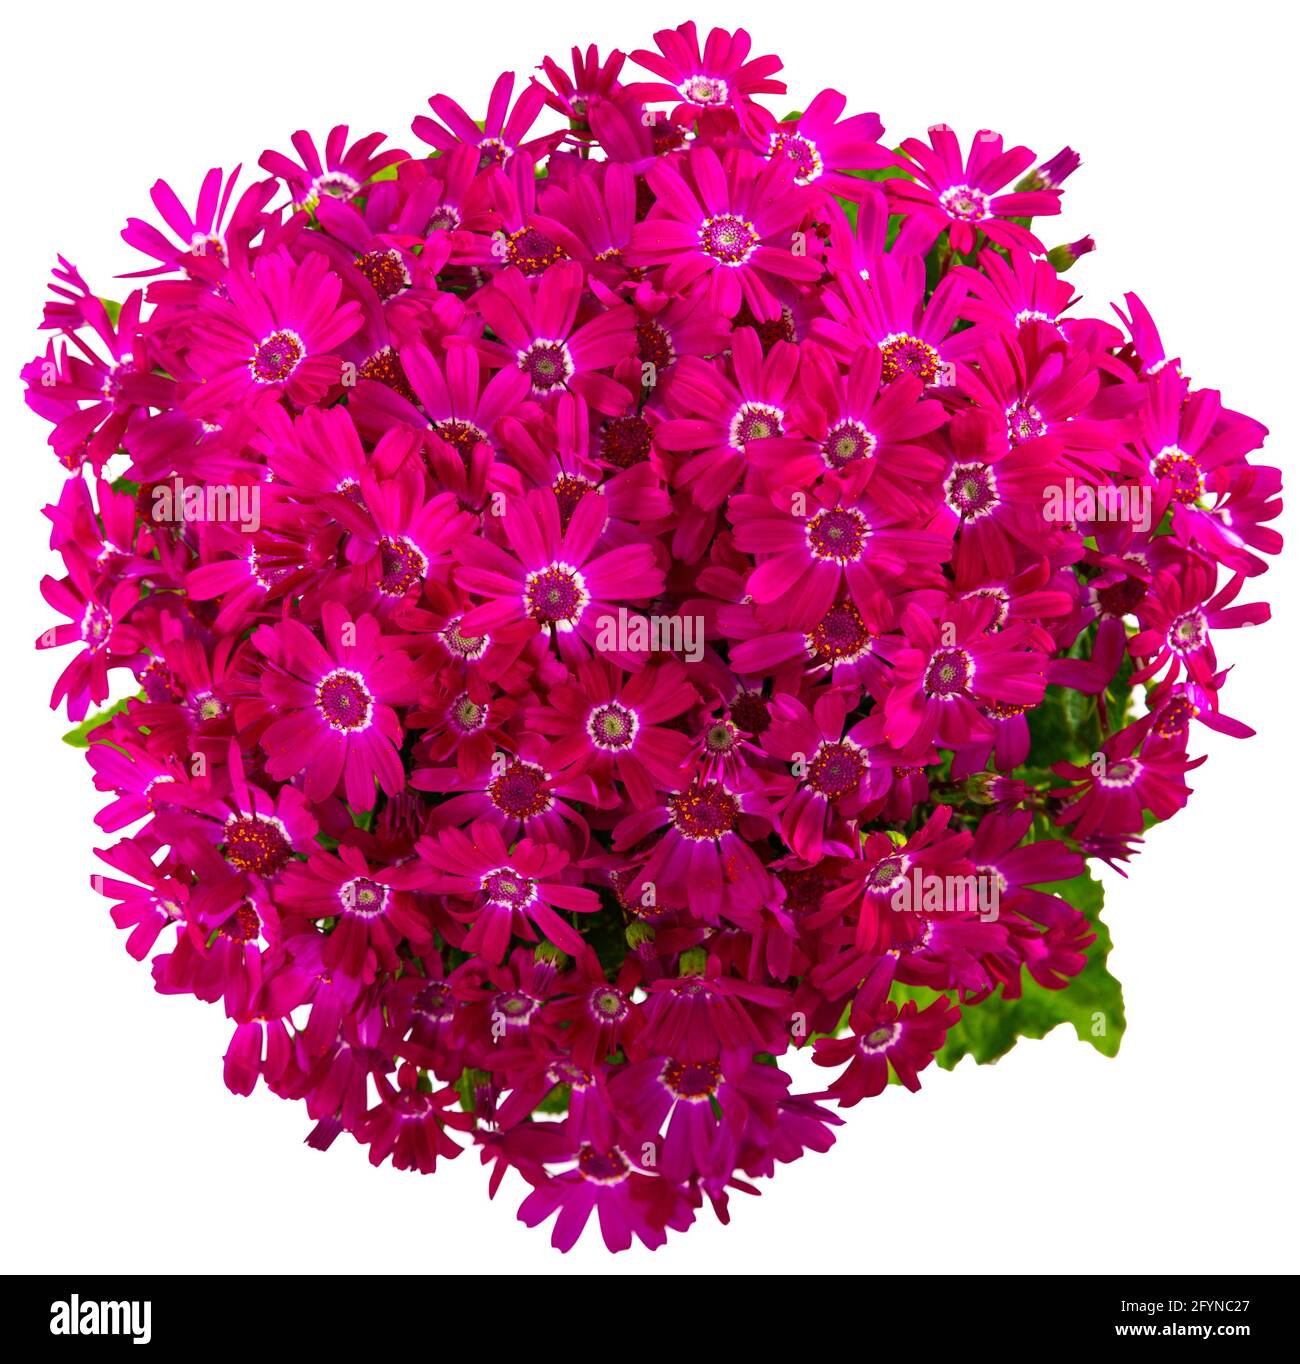 Top view of richly blooming cineraria bush with mauve flowers. Isolated over white background Stock Photo